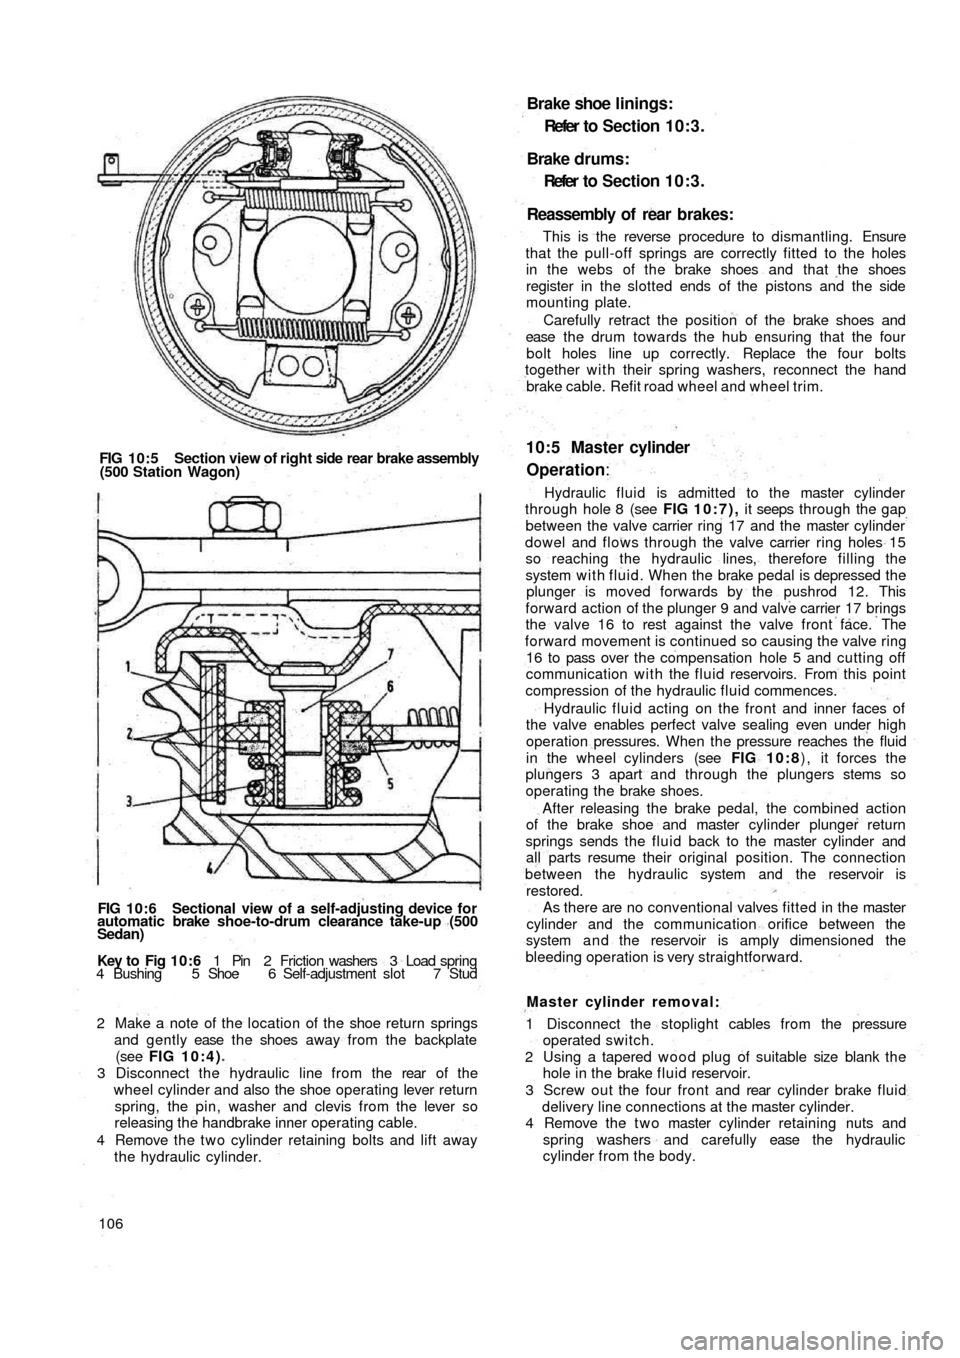 FIAT 500 1960 1.G Workshop Manual FIG 10:5 Section view of right side rear brake assembly
(500 Station Wagon)
FIG 10:6 Sectional view of a self-adjusting device for
automatic brake shoe-to-drum clearance take-up (500
Sedan)
Key  to   